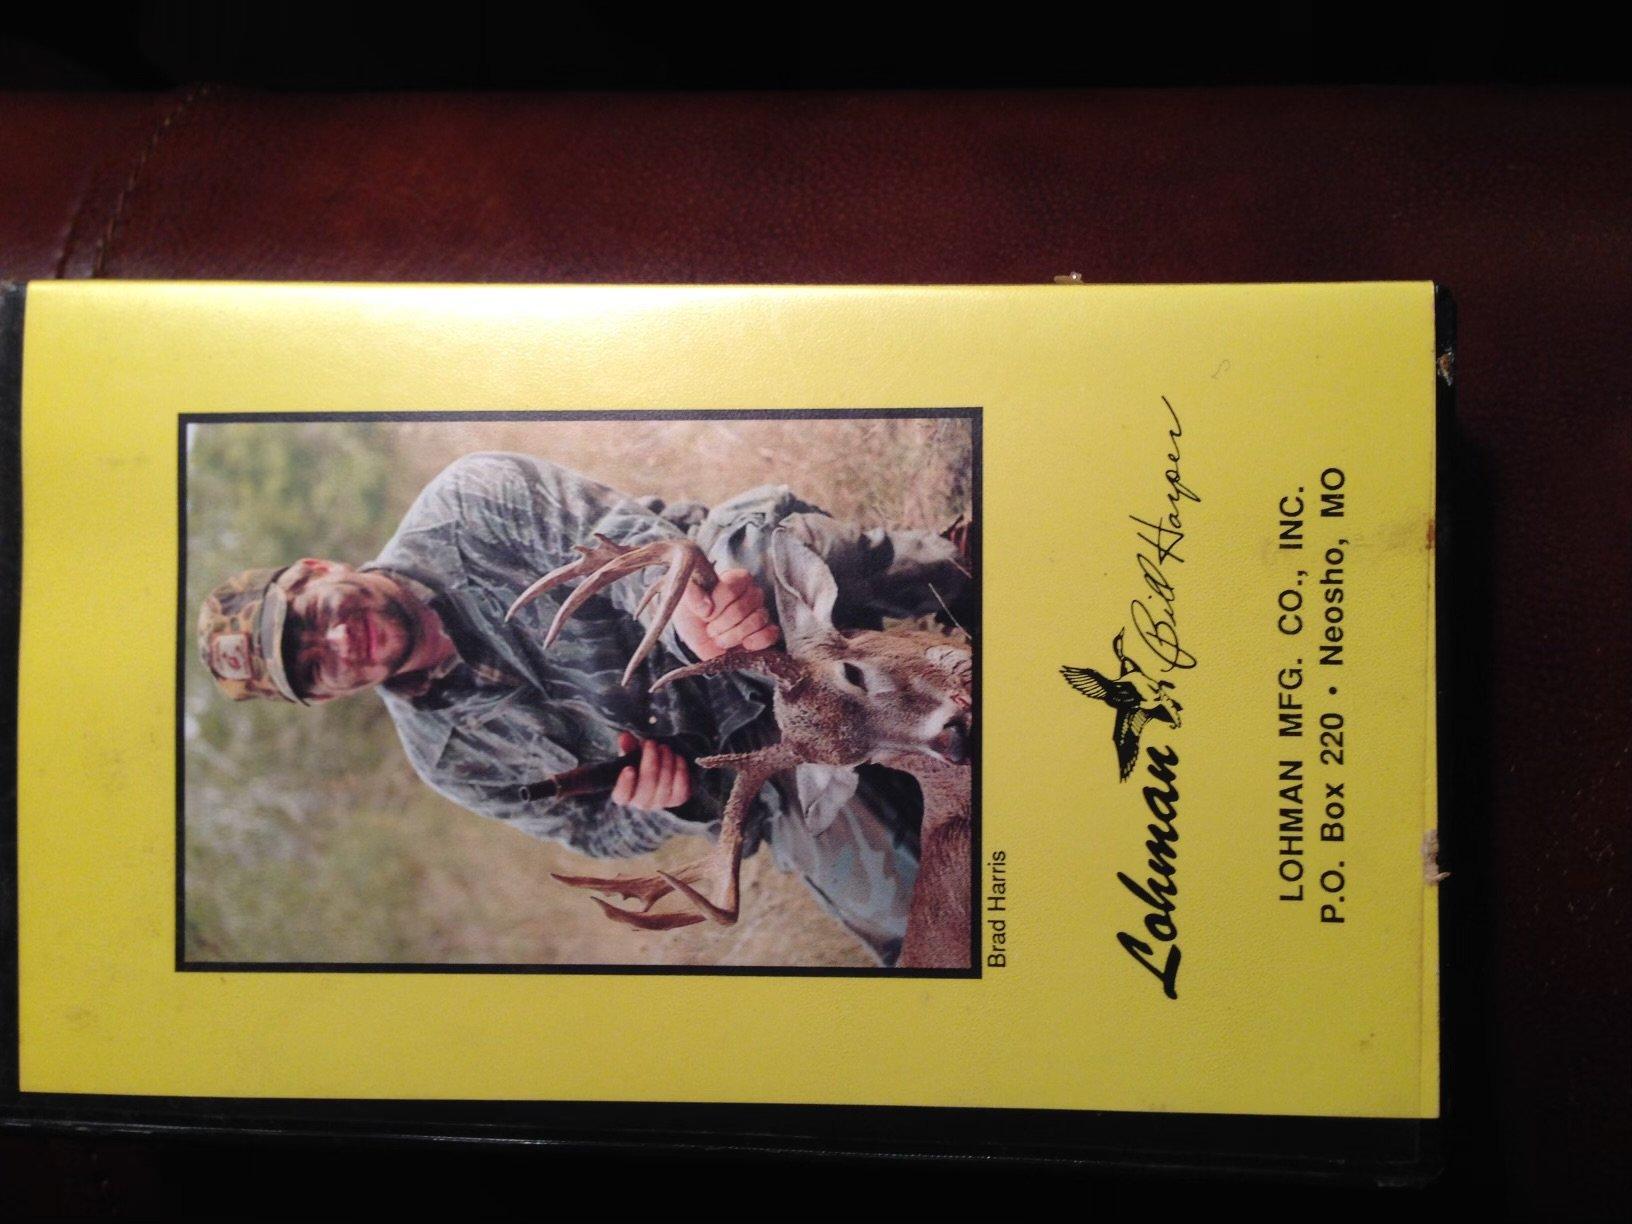 Harris went to work for the Lohman Game Call company in the early '80s. Image by Brad Harris